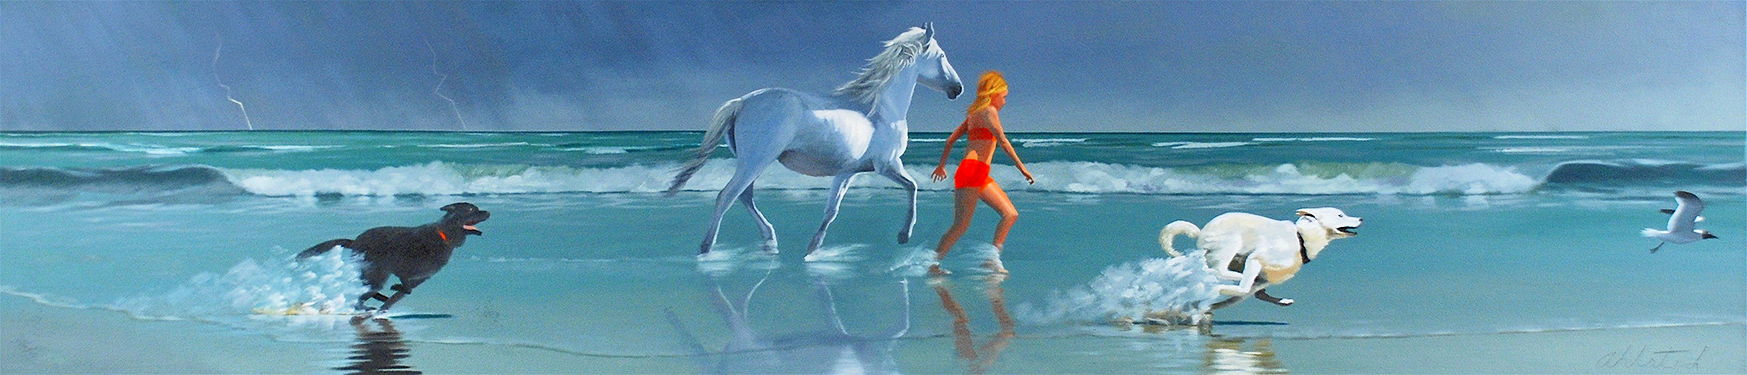 David Ahlsted - "Chloe & Cloud Dancer", Oil on Canvas, 20 x 90"